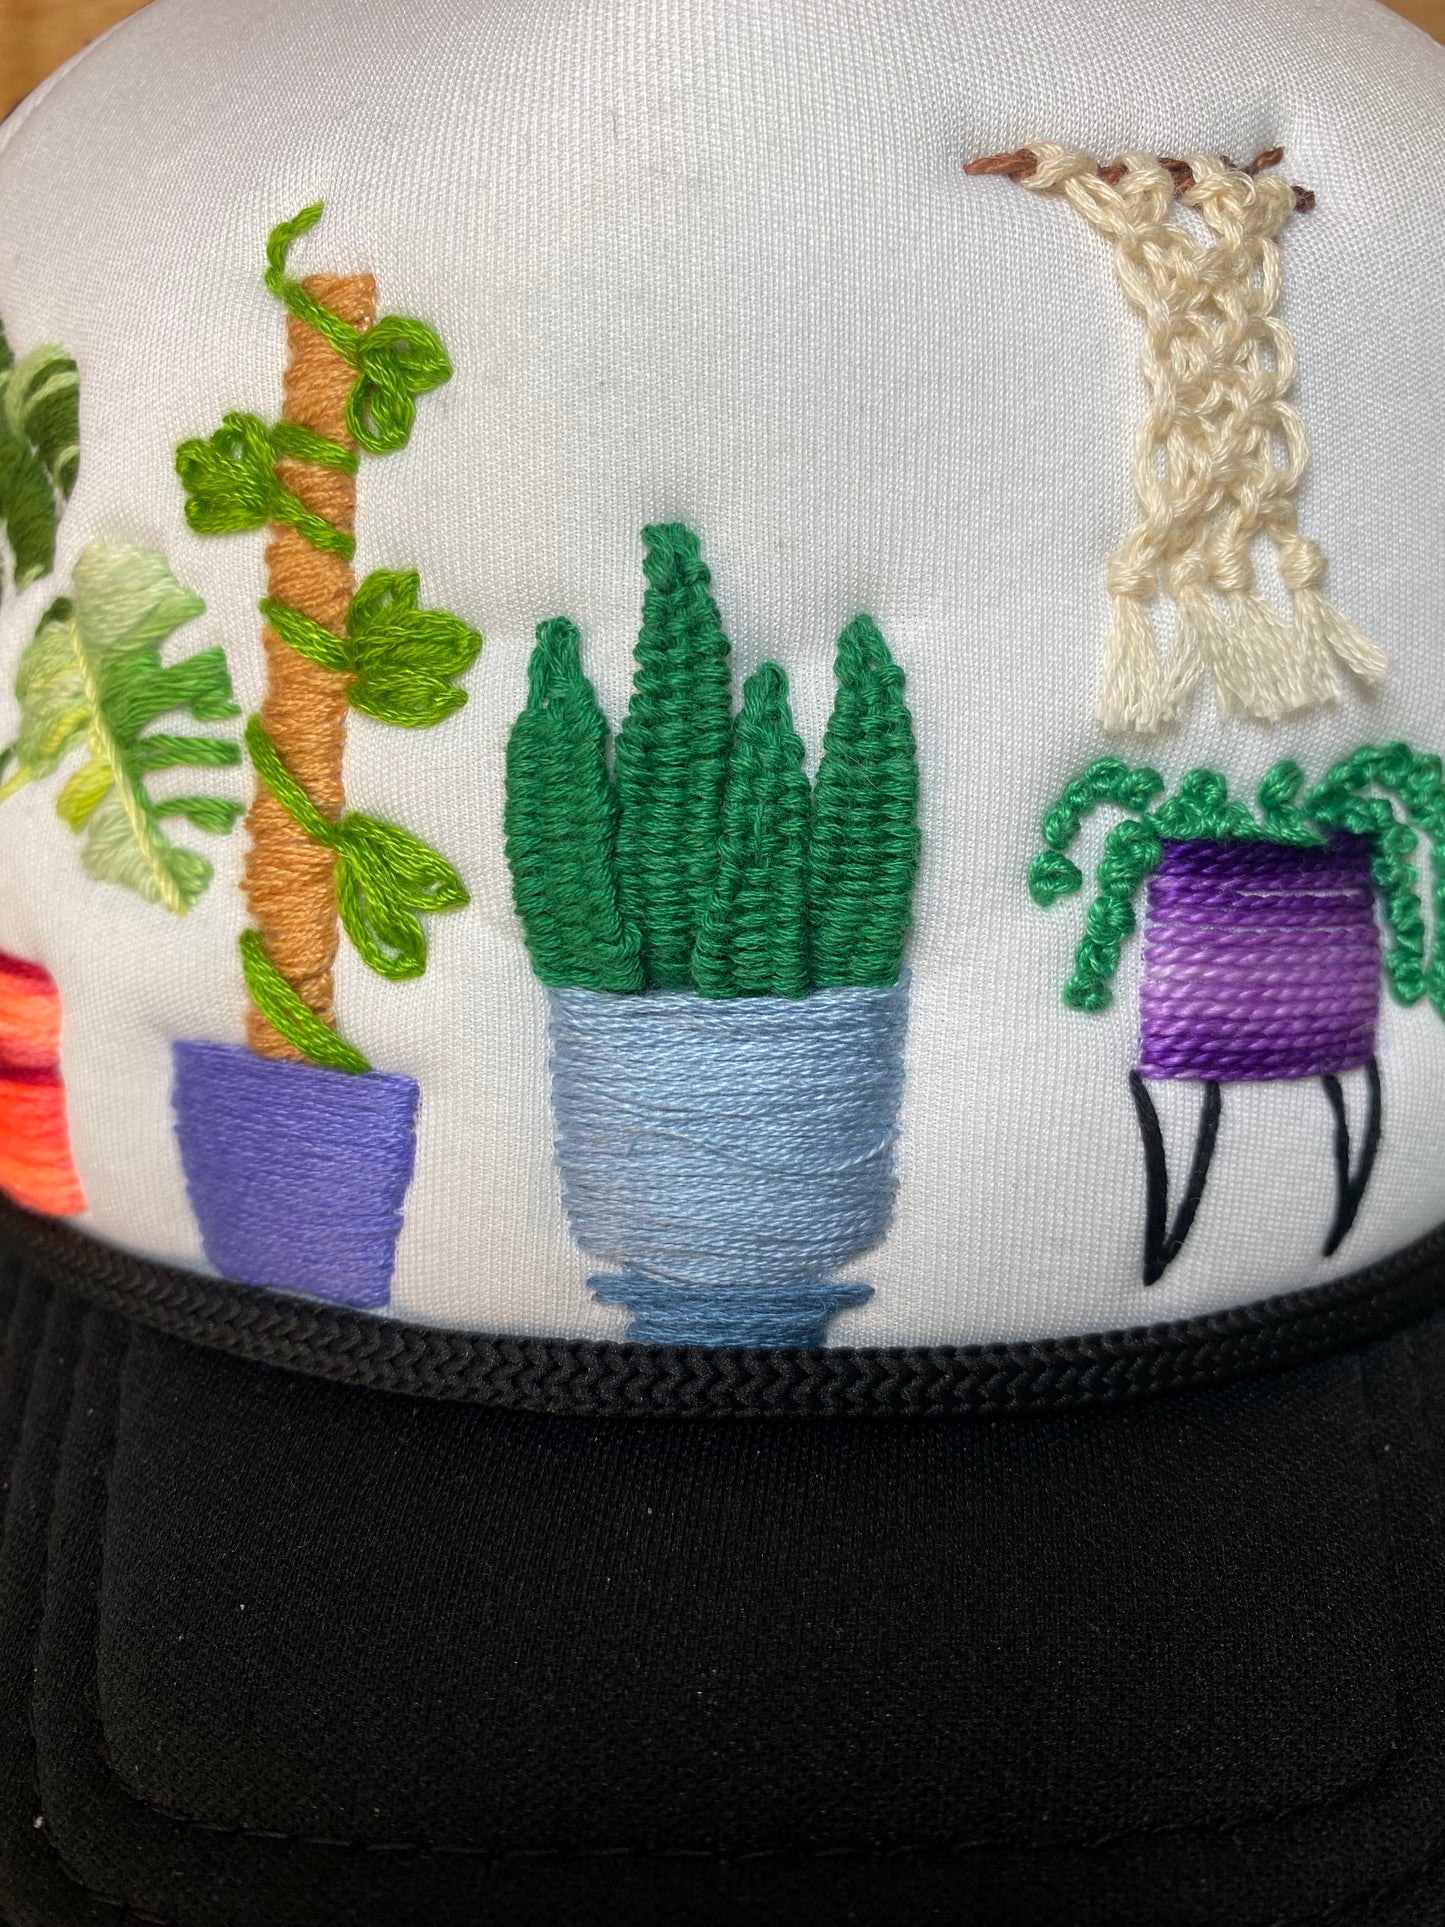 Houseplant Lovers Trucker Hat, hand embroidered